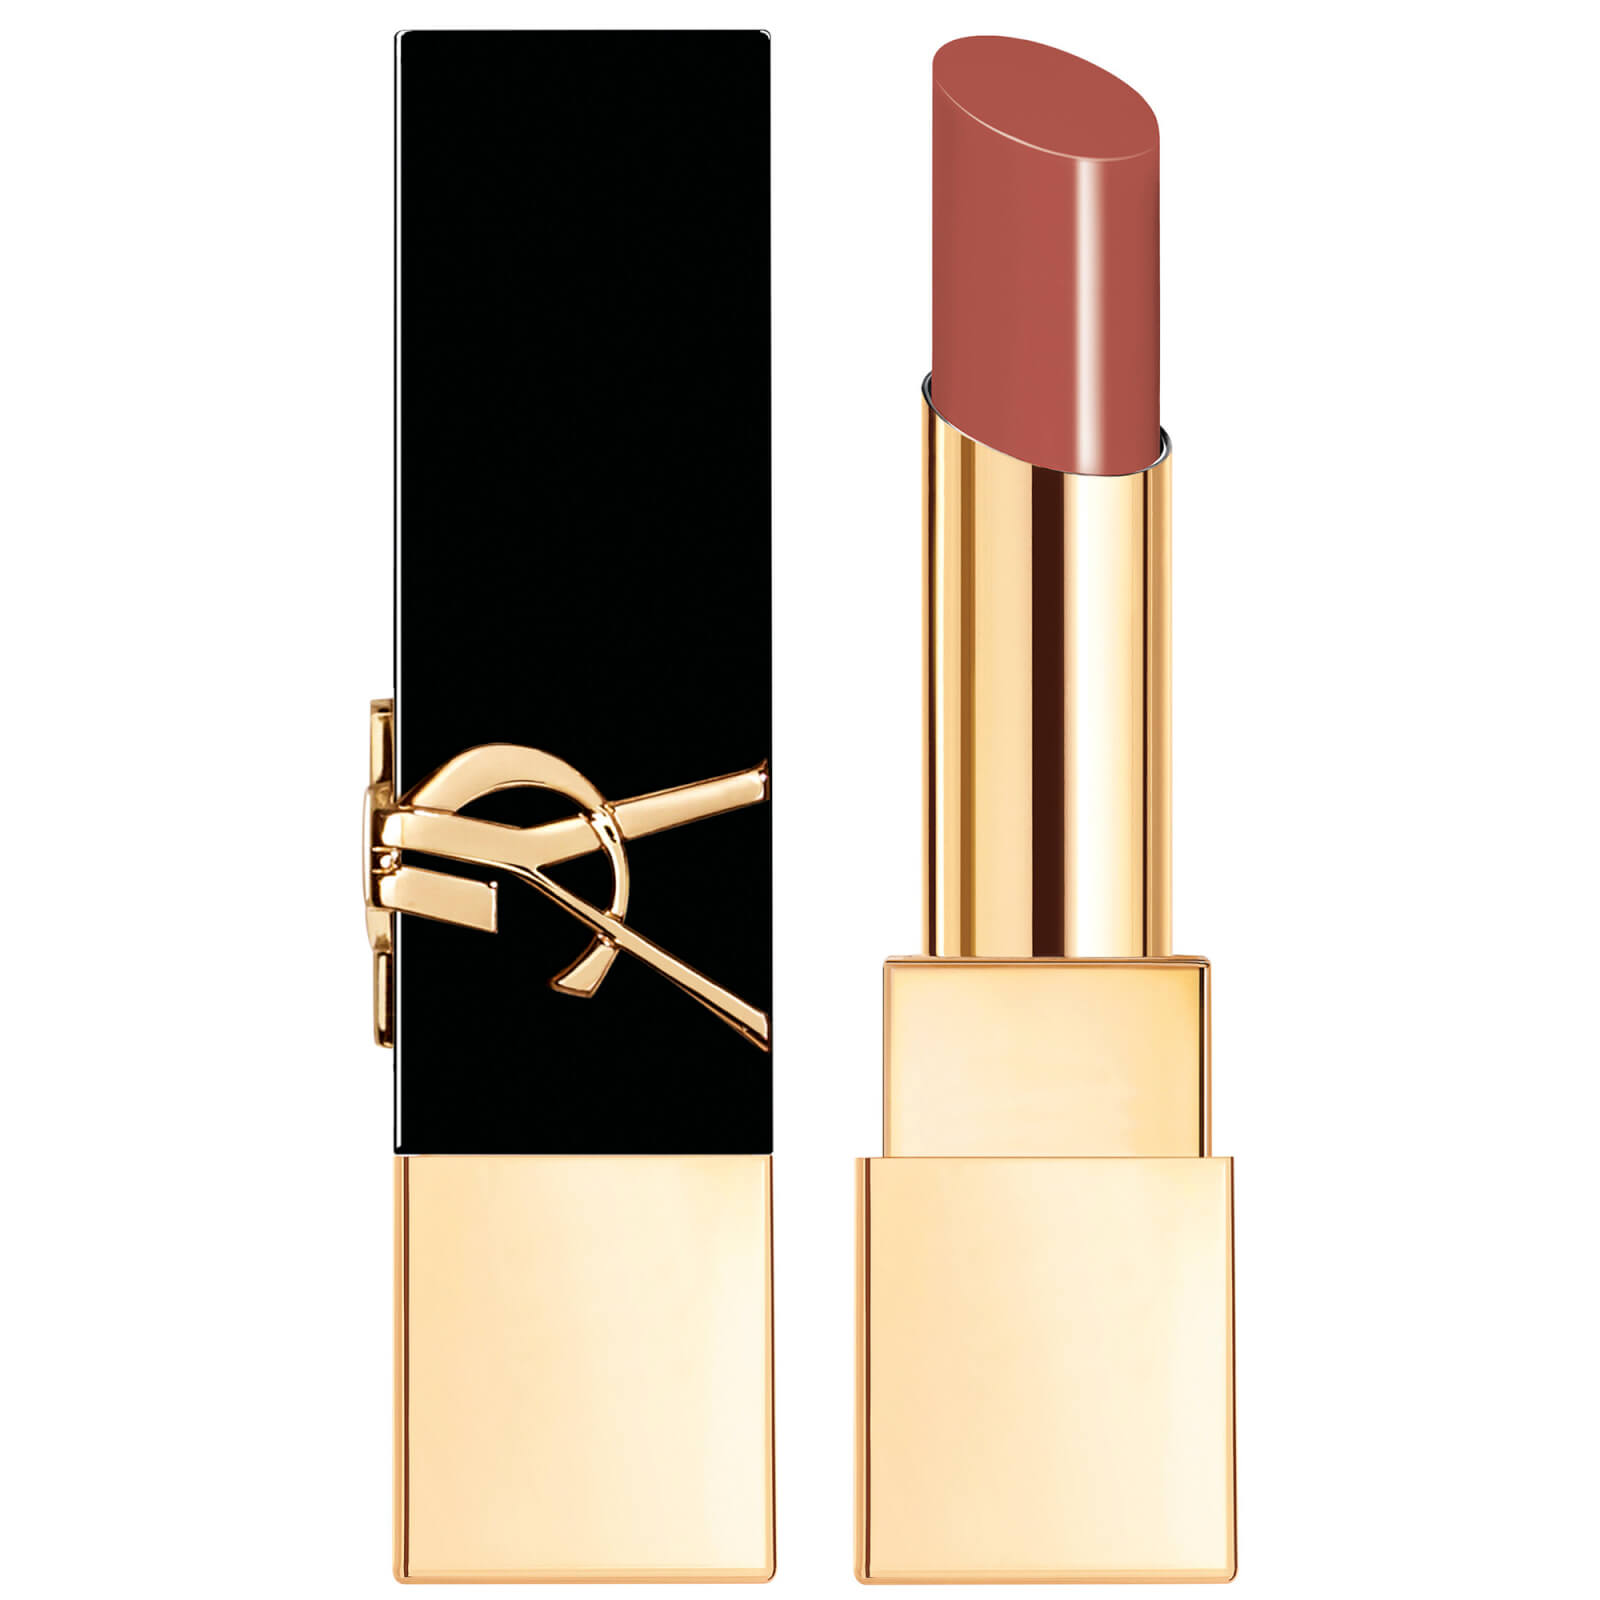 Yves Saint Laurent Rouge Pur Couture The Bold Lipstick 3g (Various Shades) - Nude N44